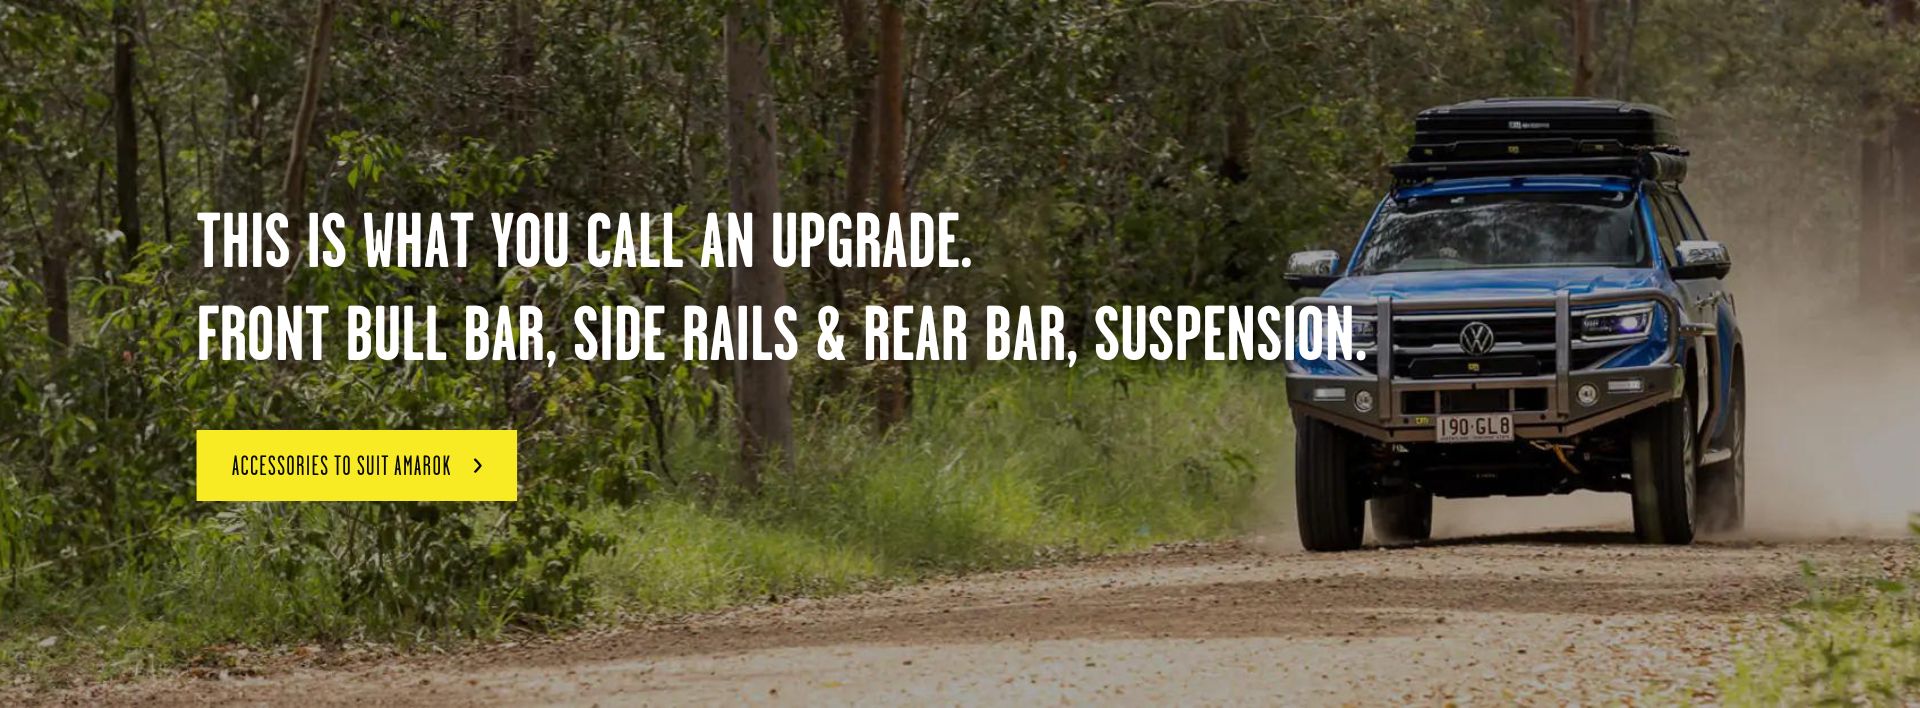 This is what you call an upgrade. Front Bull Bar, Side Rails and Rear Bar, Suspension.